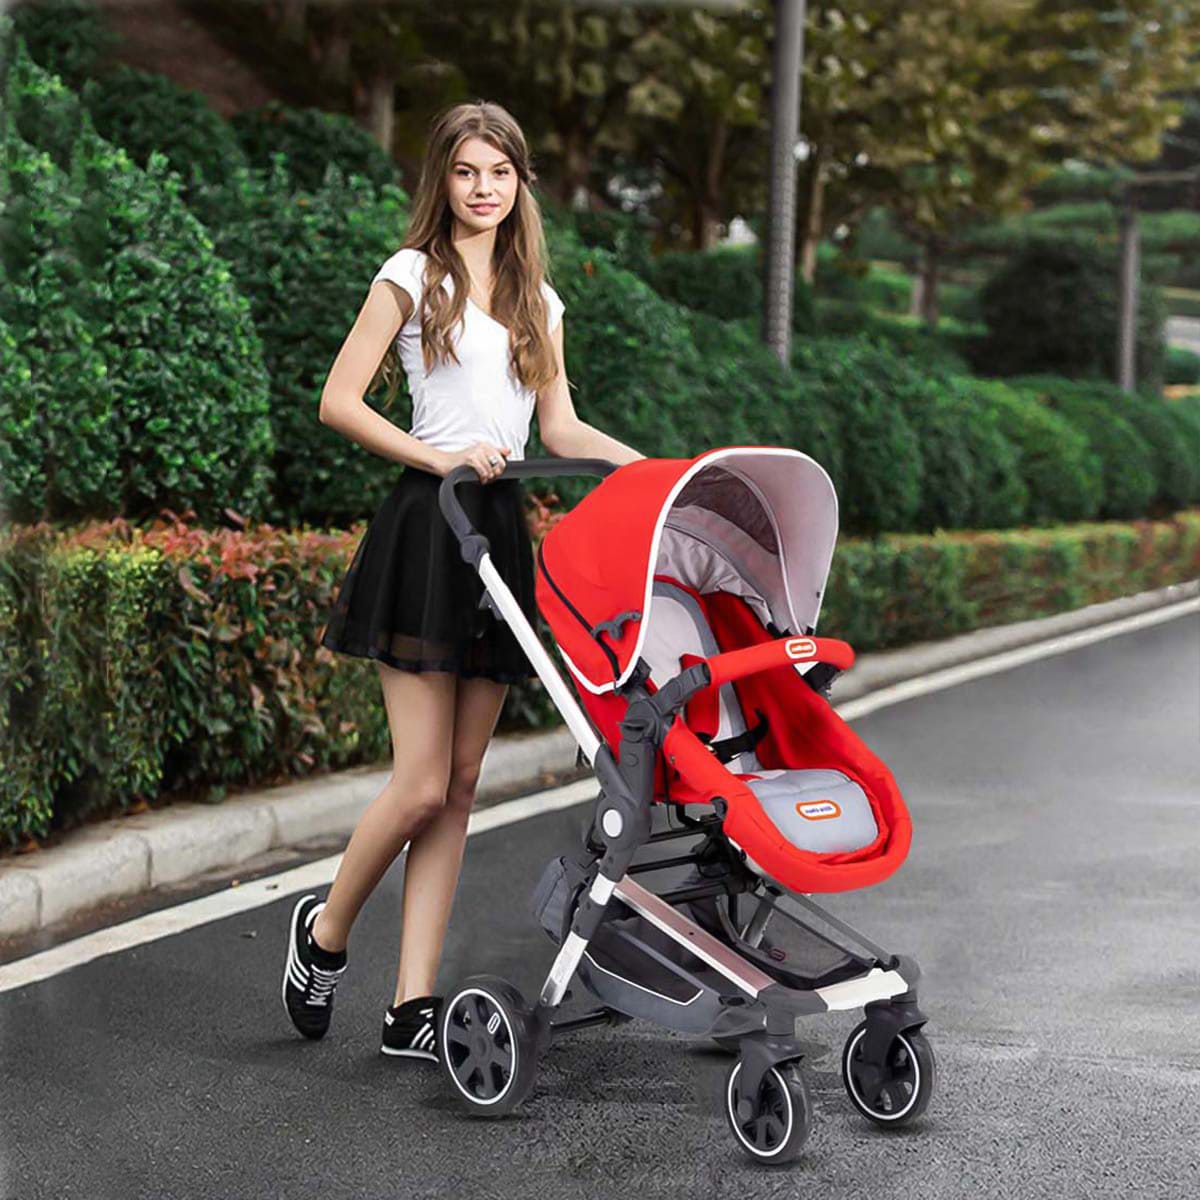 Variety of Baby Prams for Ages 0-5 years